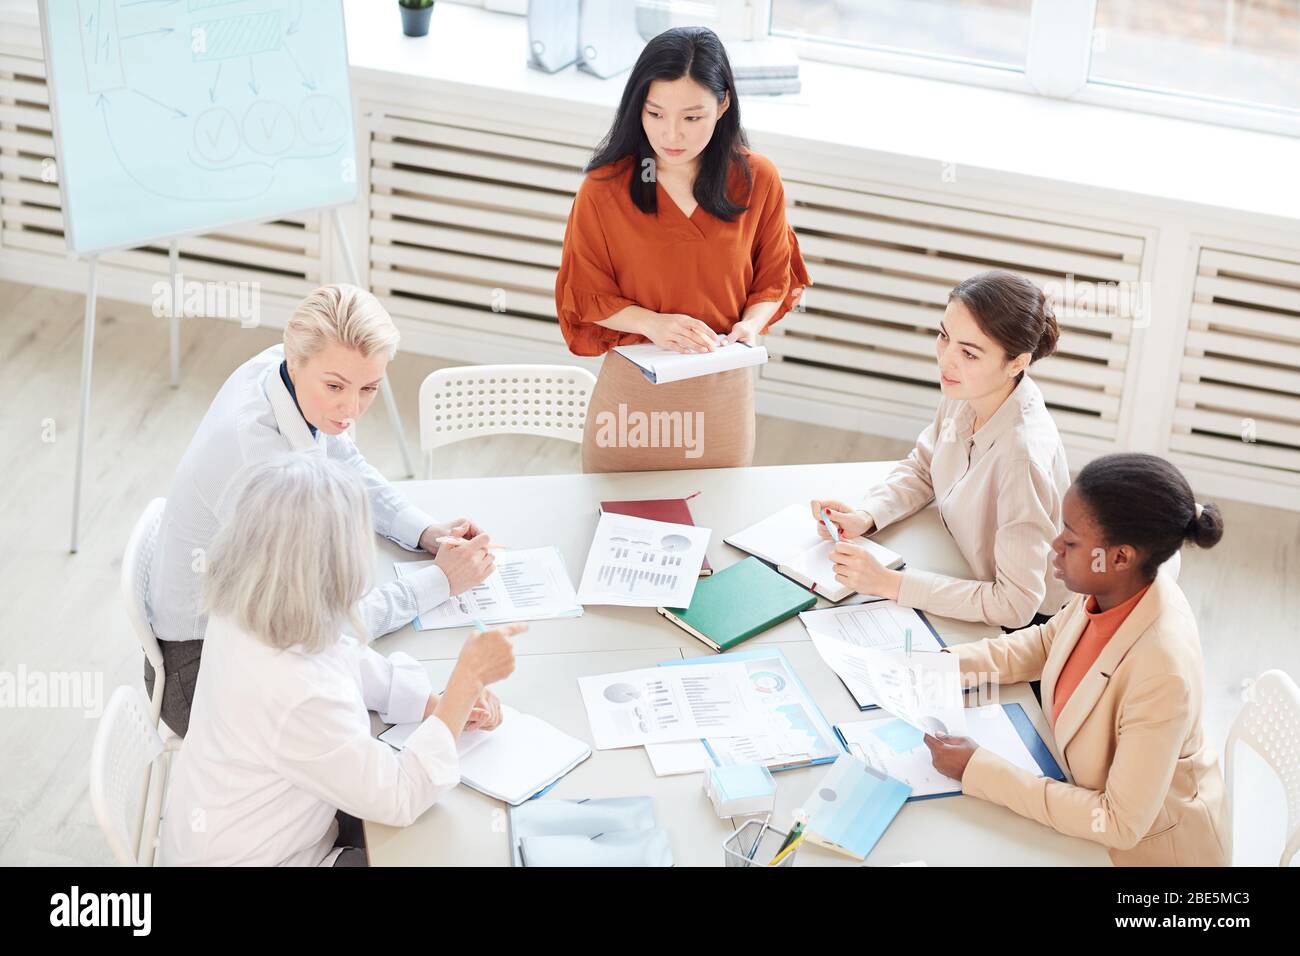 High angle view at successful Asian businesswoman presenting project plan to group of female colleagues while standing by whiteboard during meeting in Stock Photo